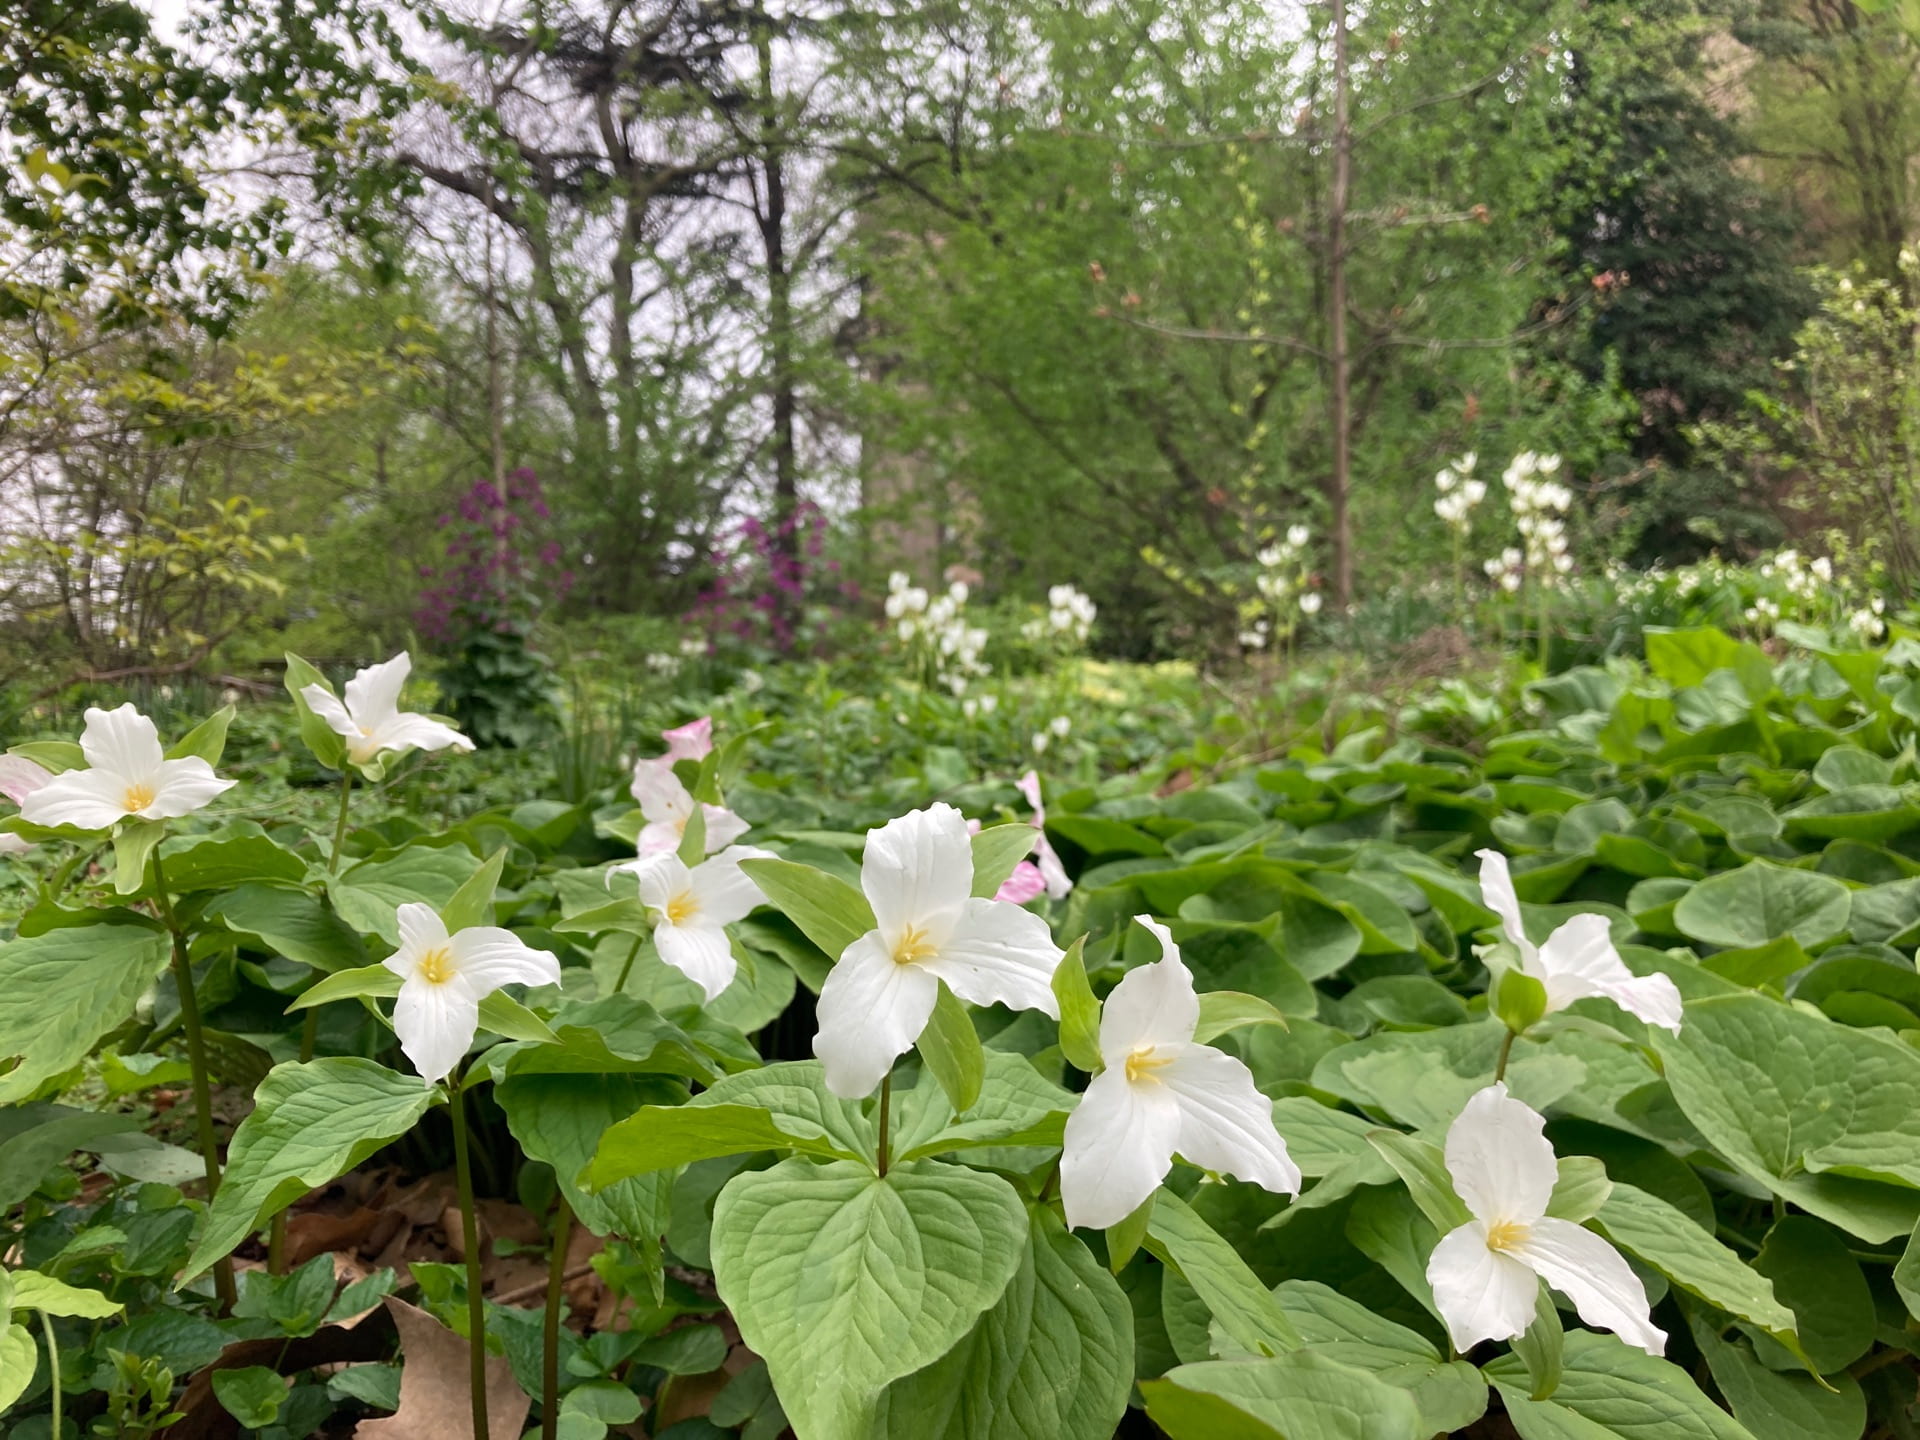 Different species of Trillium are dotted throughout the Woodland Garden.